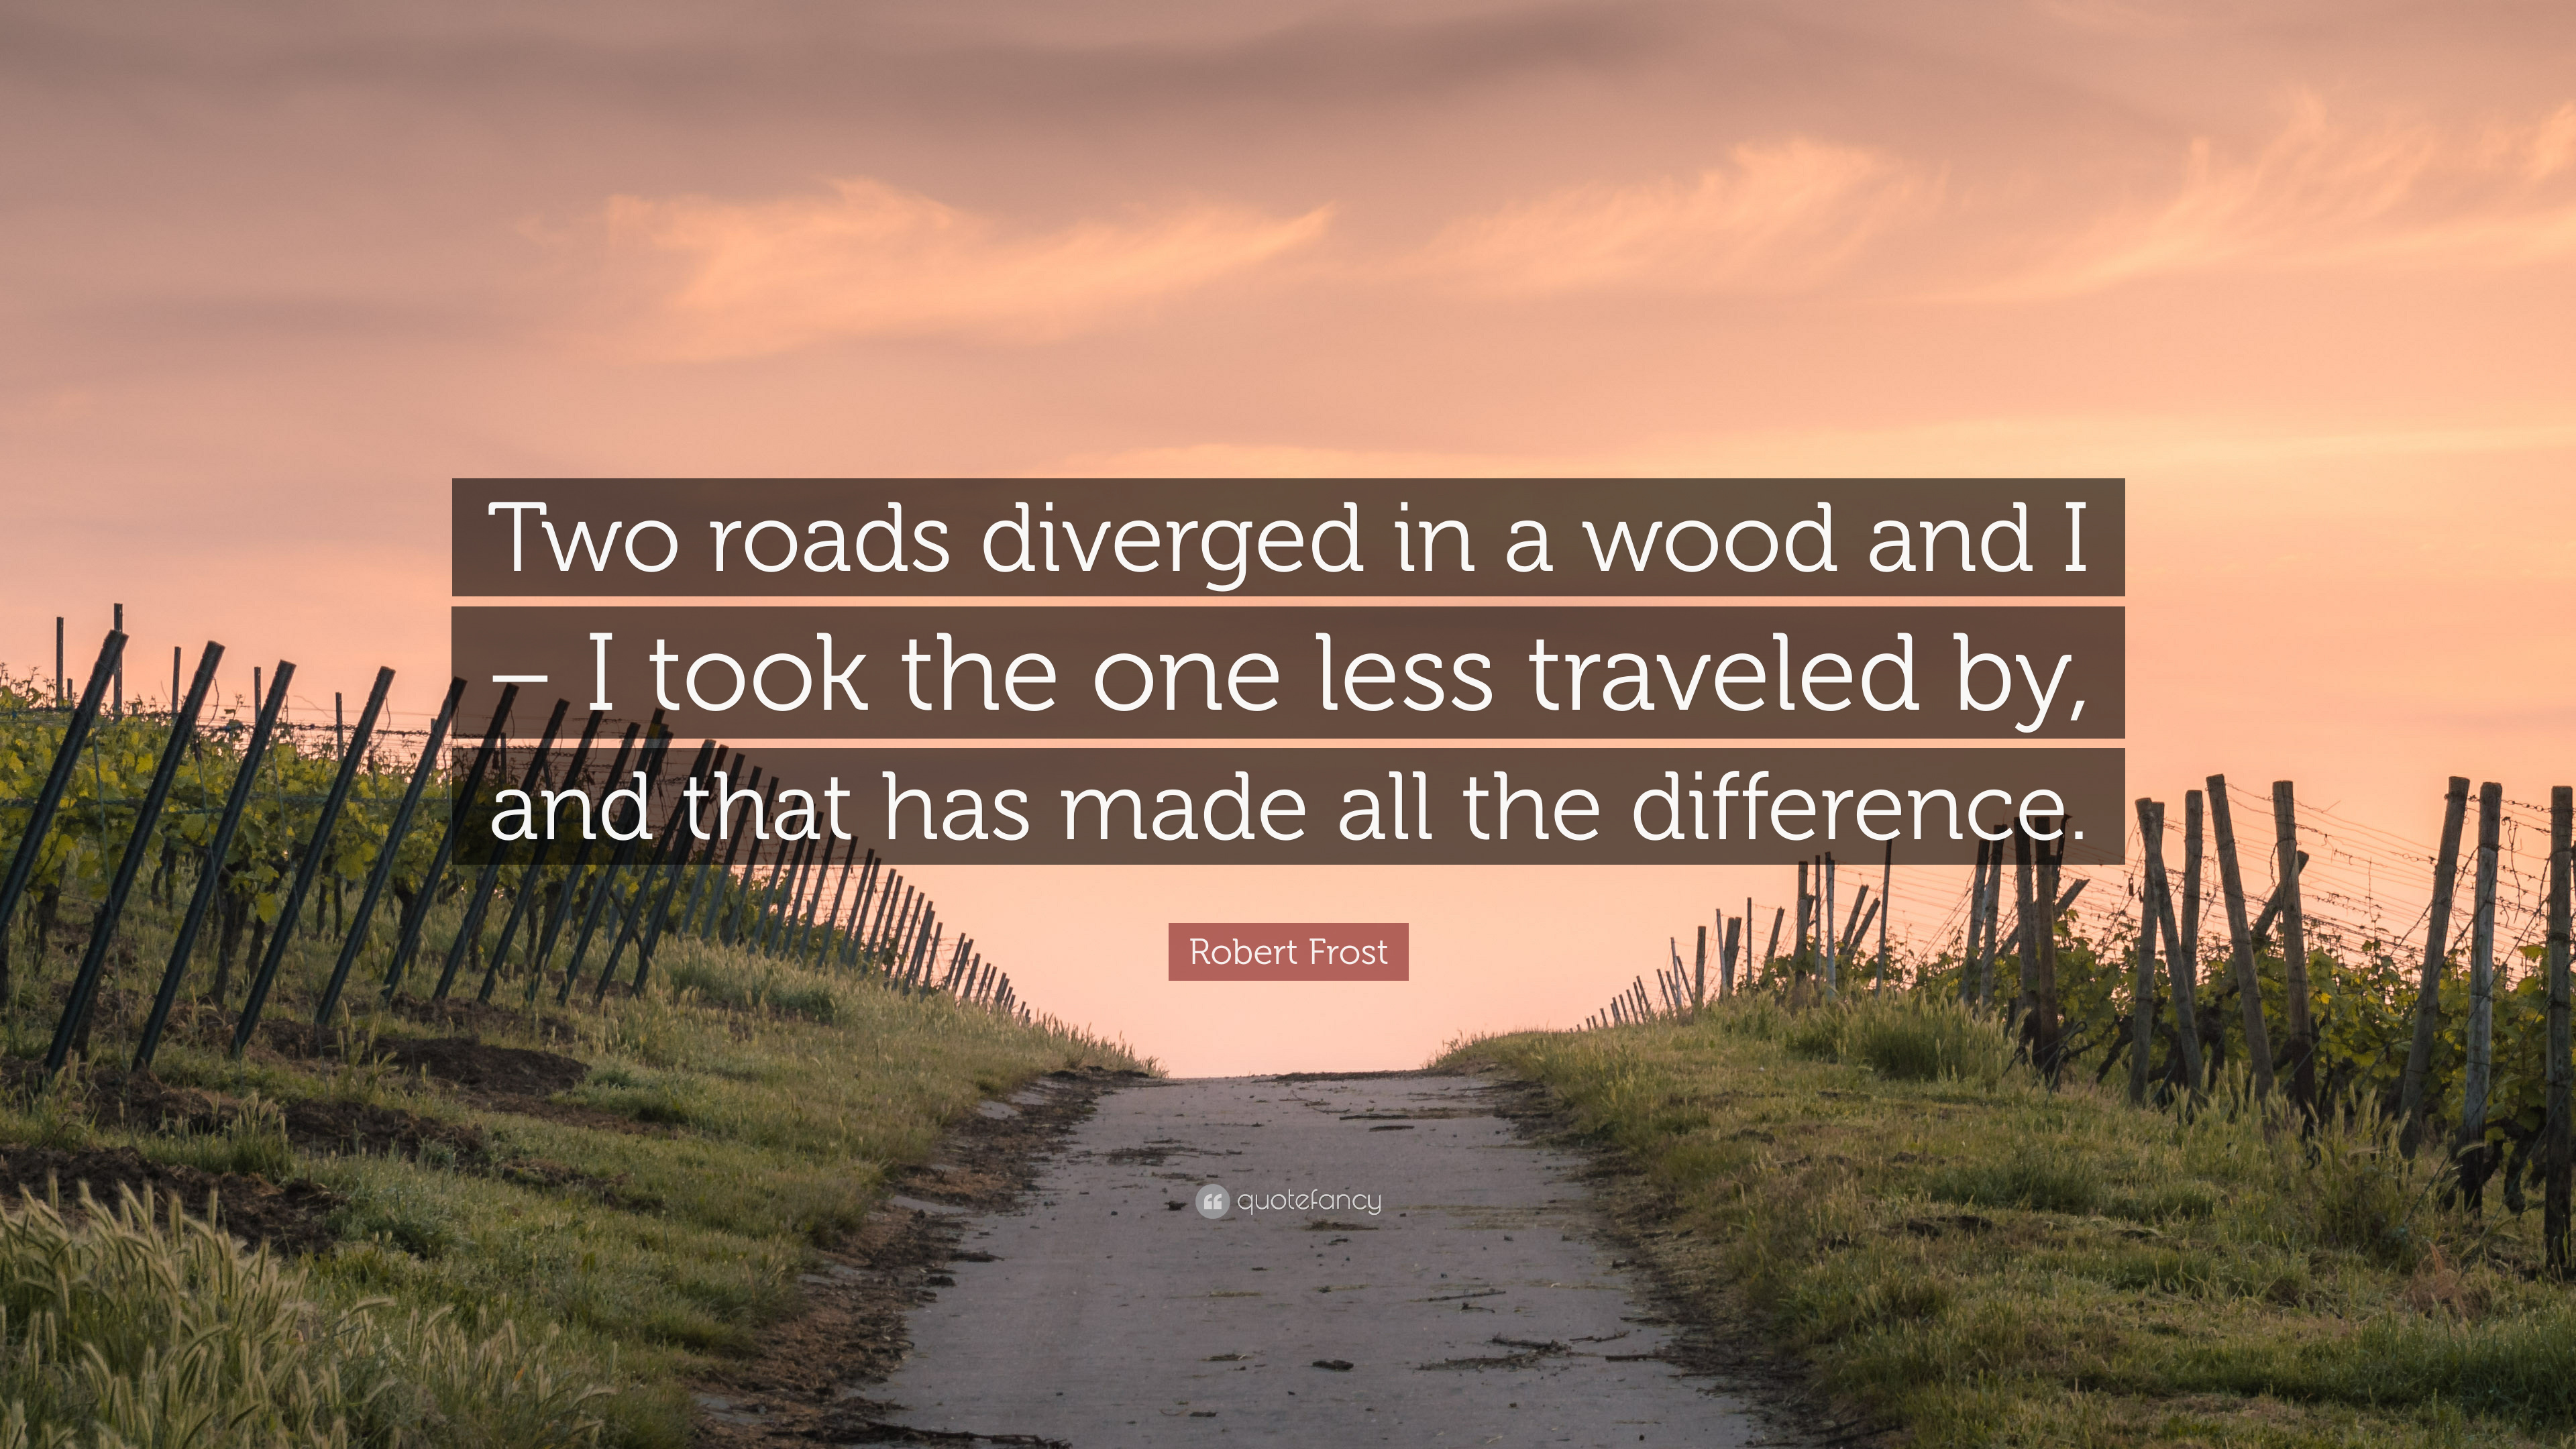 Robert Frost Quote: “Two roads diverged .quotefancy.com